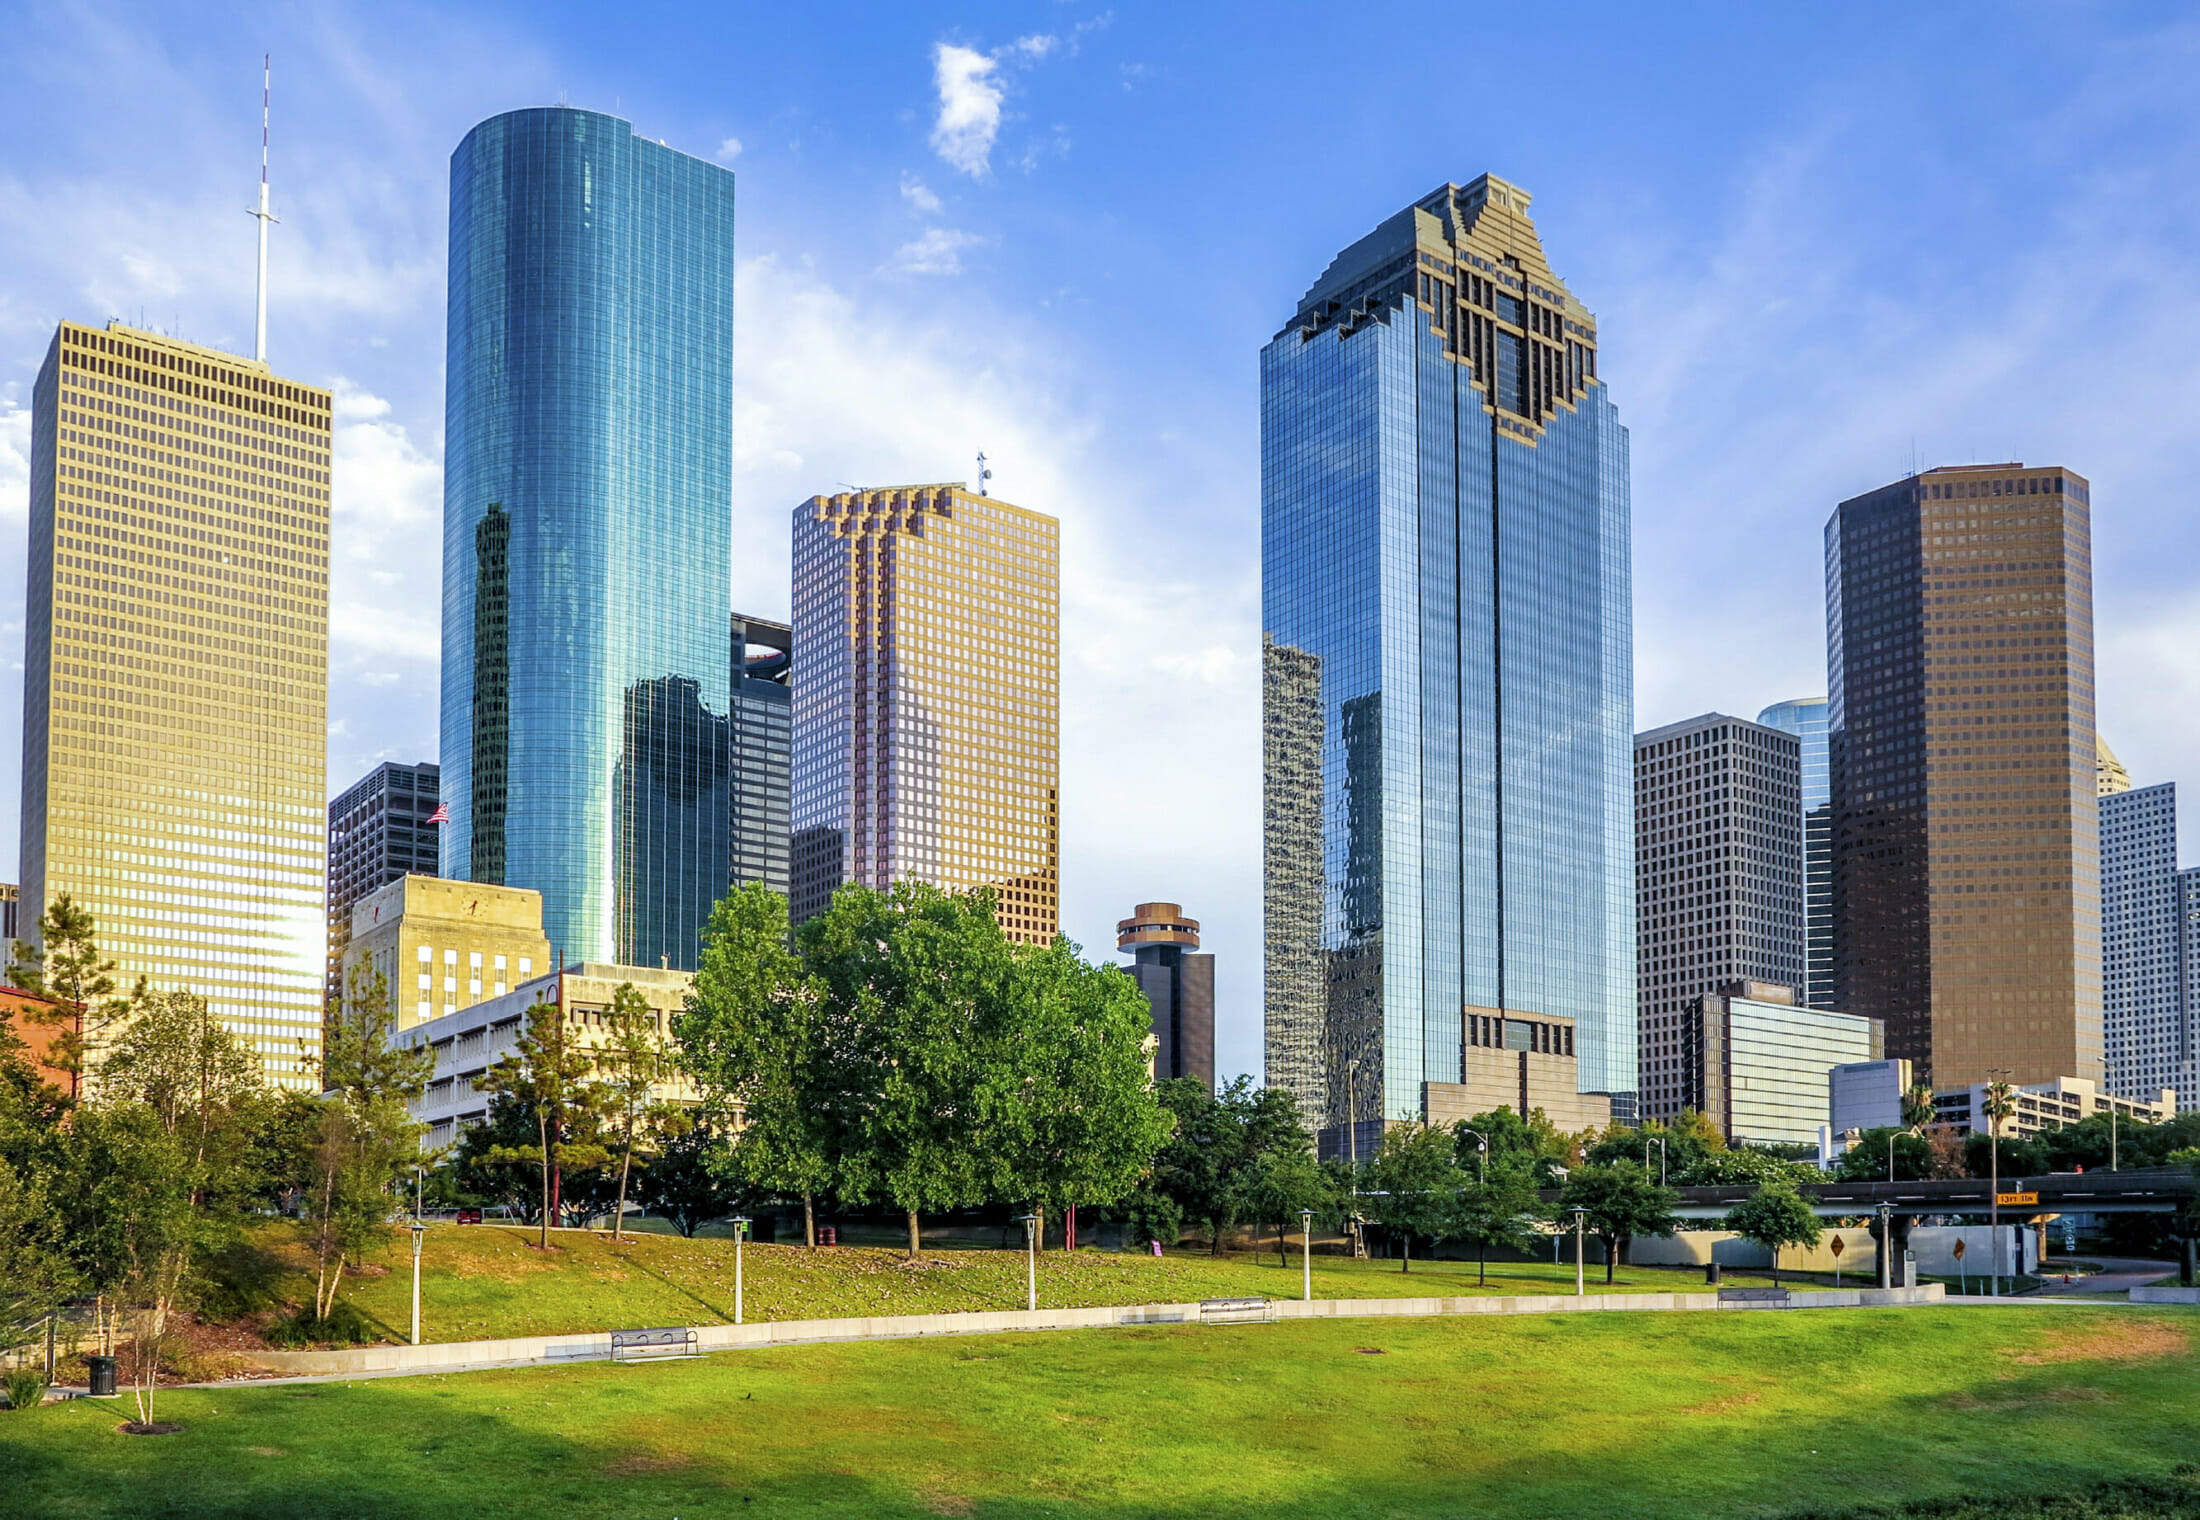 Houston, Texas | 50 Up-and-Coming Real Estate Markets to Watch in 2019 | Buildium